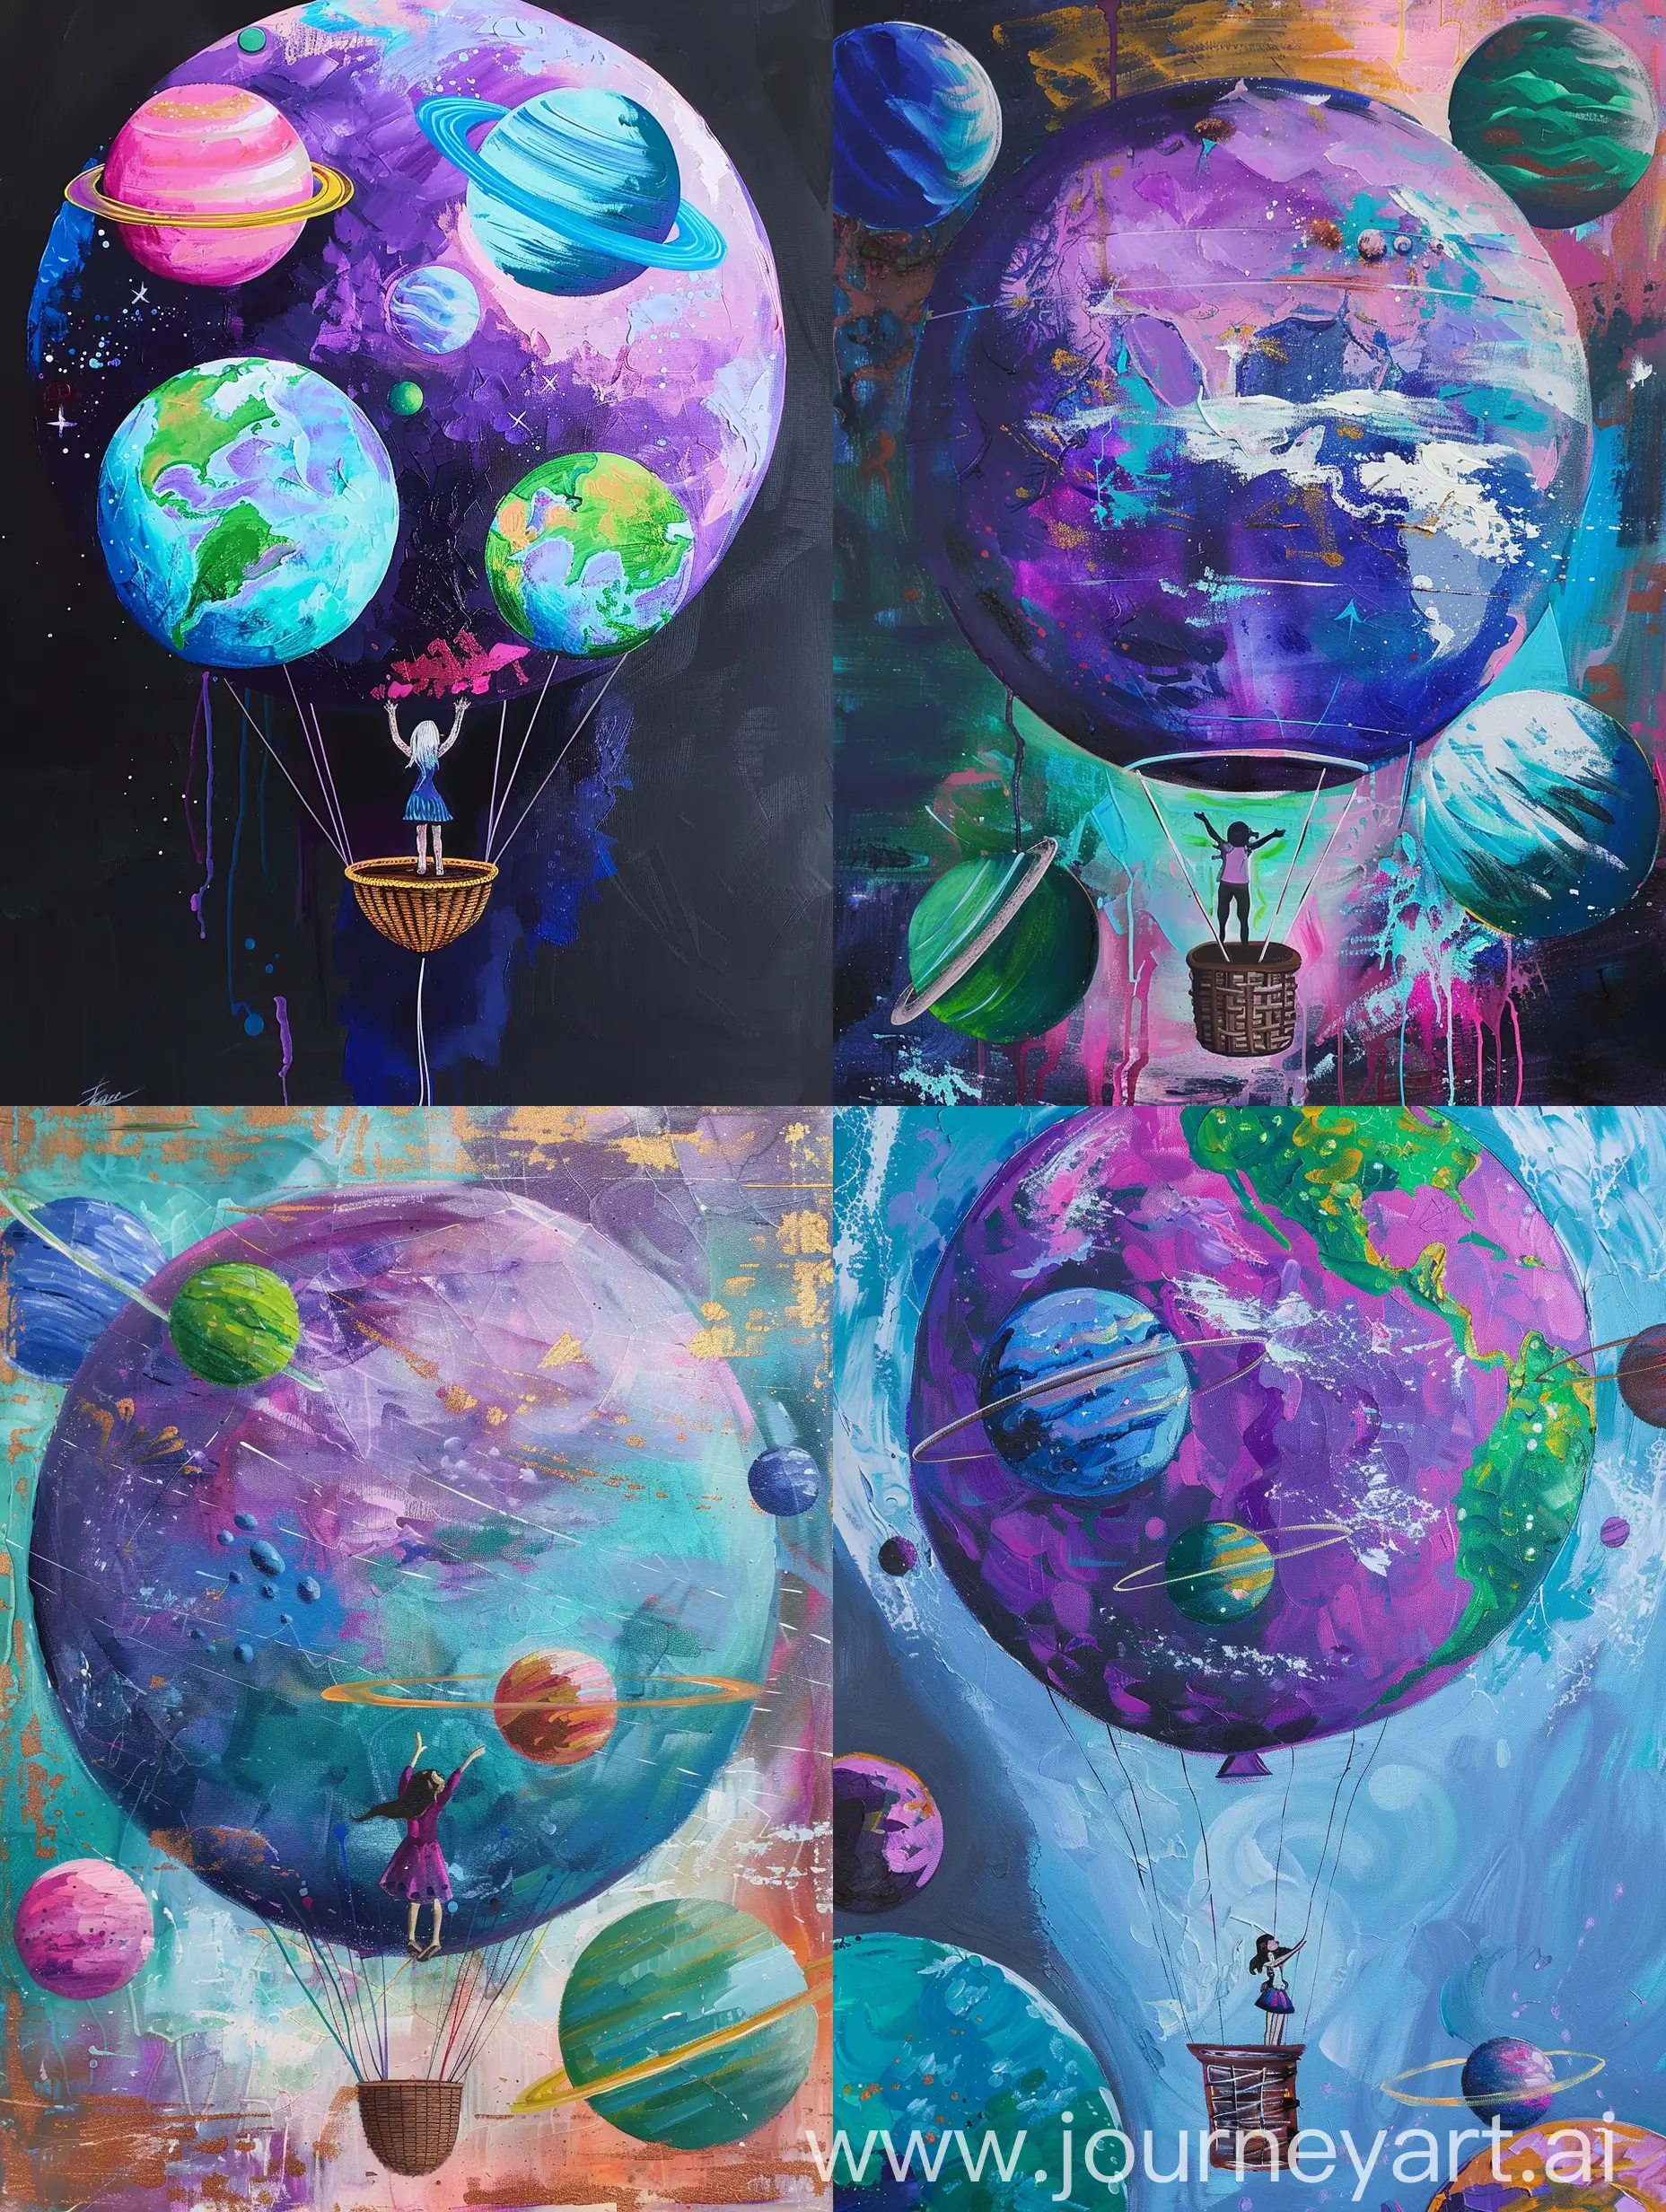 A large balloon is flying like a basket, with large planets painted on it.  The predominant colors are purple, blue, green, pink.  A small female figure stands in the basket of the ball and stretches her hands up towards the ball.  Made using acrylic technique